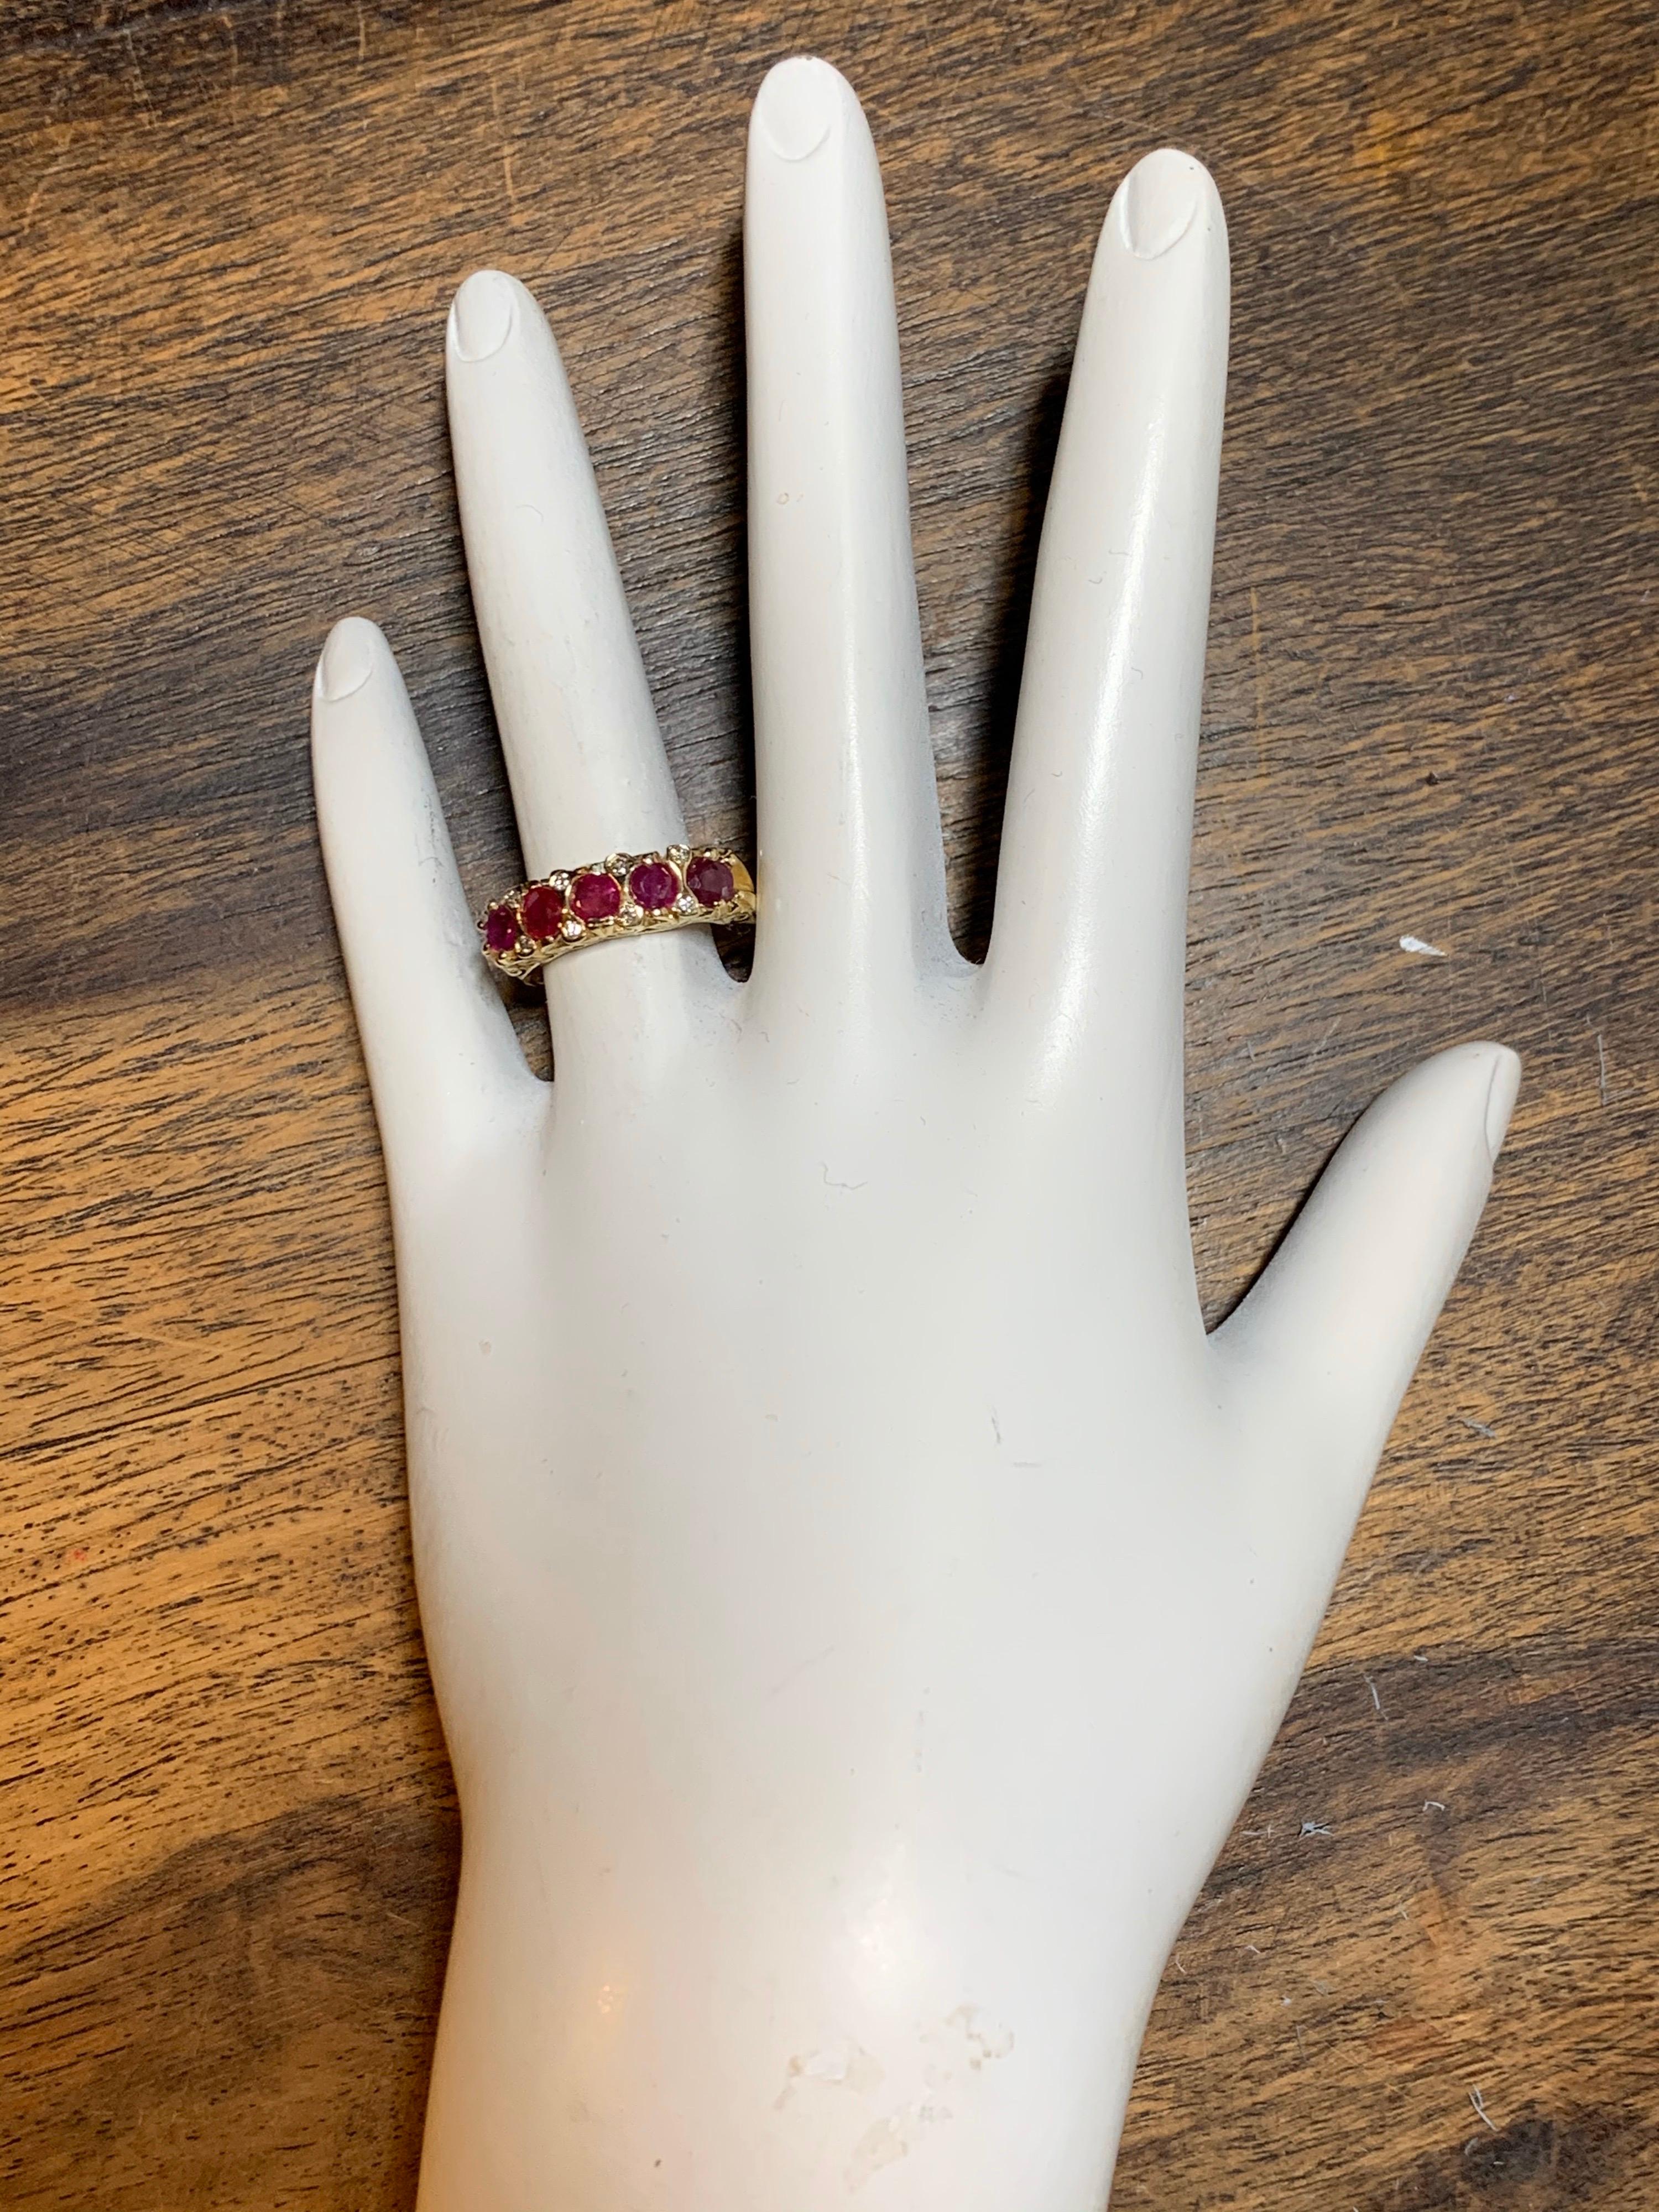 Retro 14k Yellow Gold Cocktail Ring set with five Round Brilliant Natural Rubies (approx 1 carat) & 8 Natural Diamonds (approx .10 Carat) F-G in color and VS-SI in clarity.

Circa 1960.

Ring weight is 3.2 grams, ring size is 6.25.

Condition is